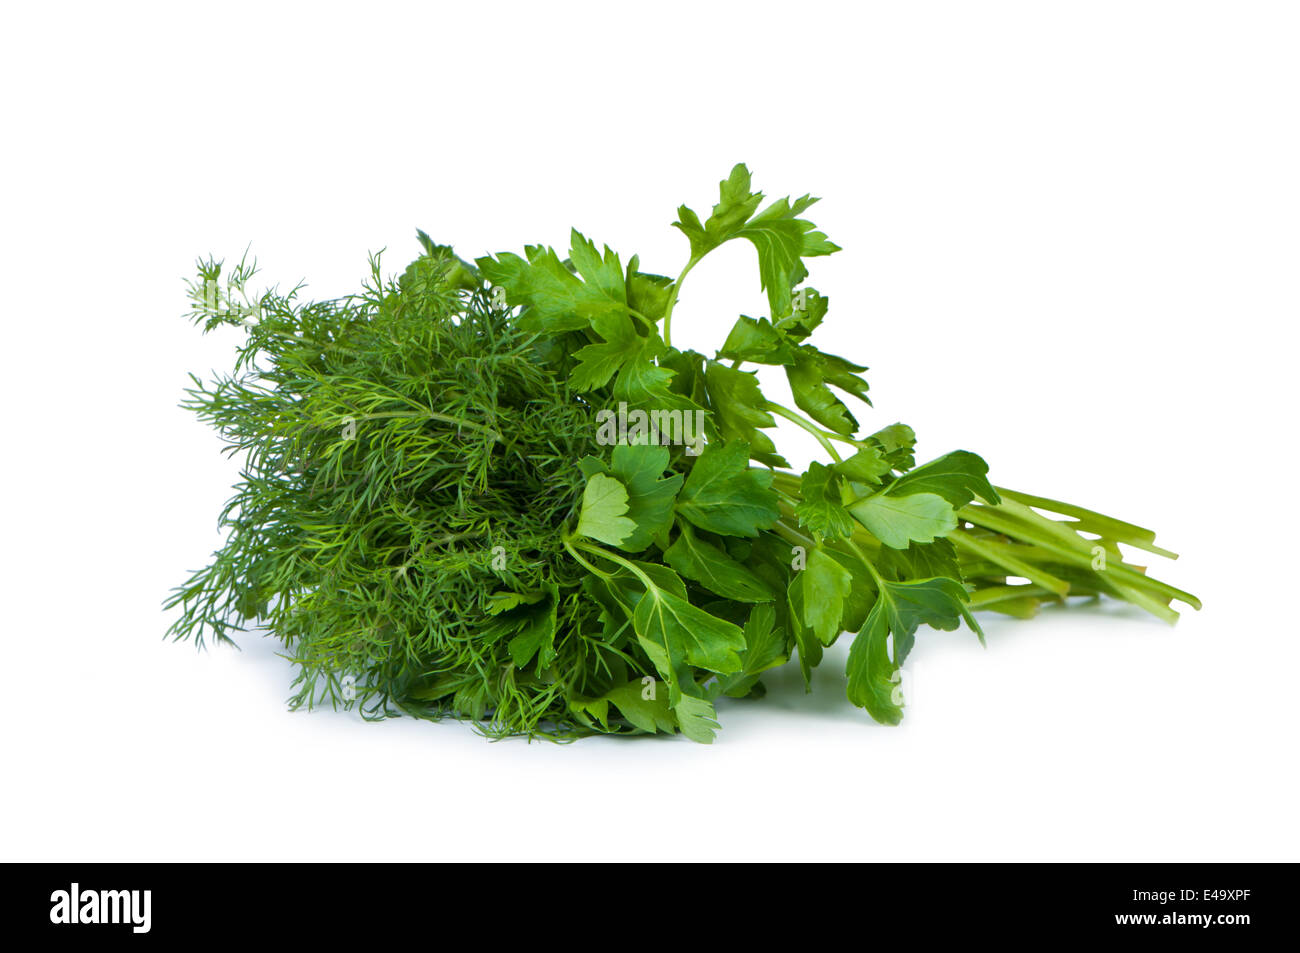 Parsley and dill on white background. Stock Photo